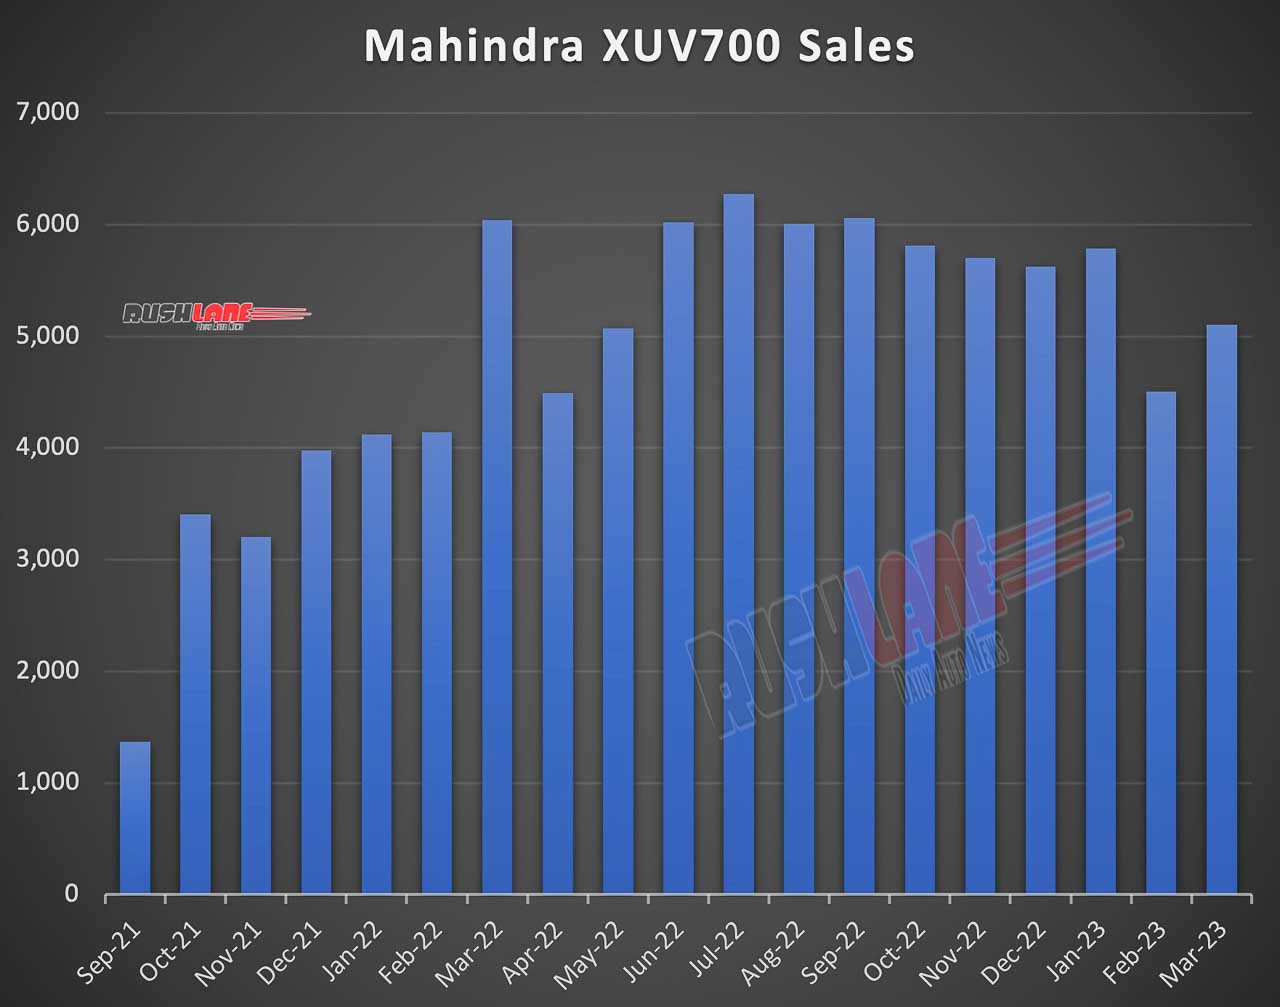 Mahindra XUV700 Domestic Sales since launch till March 2023. April 2023 nos not available.